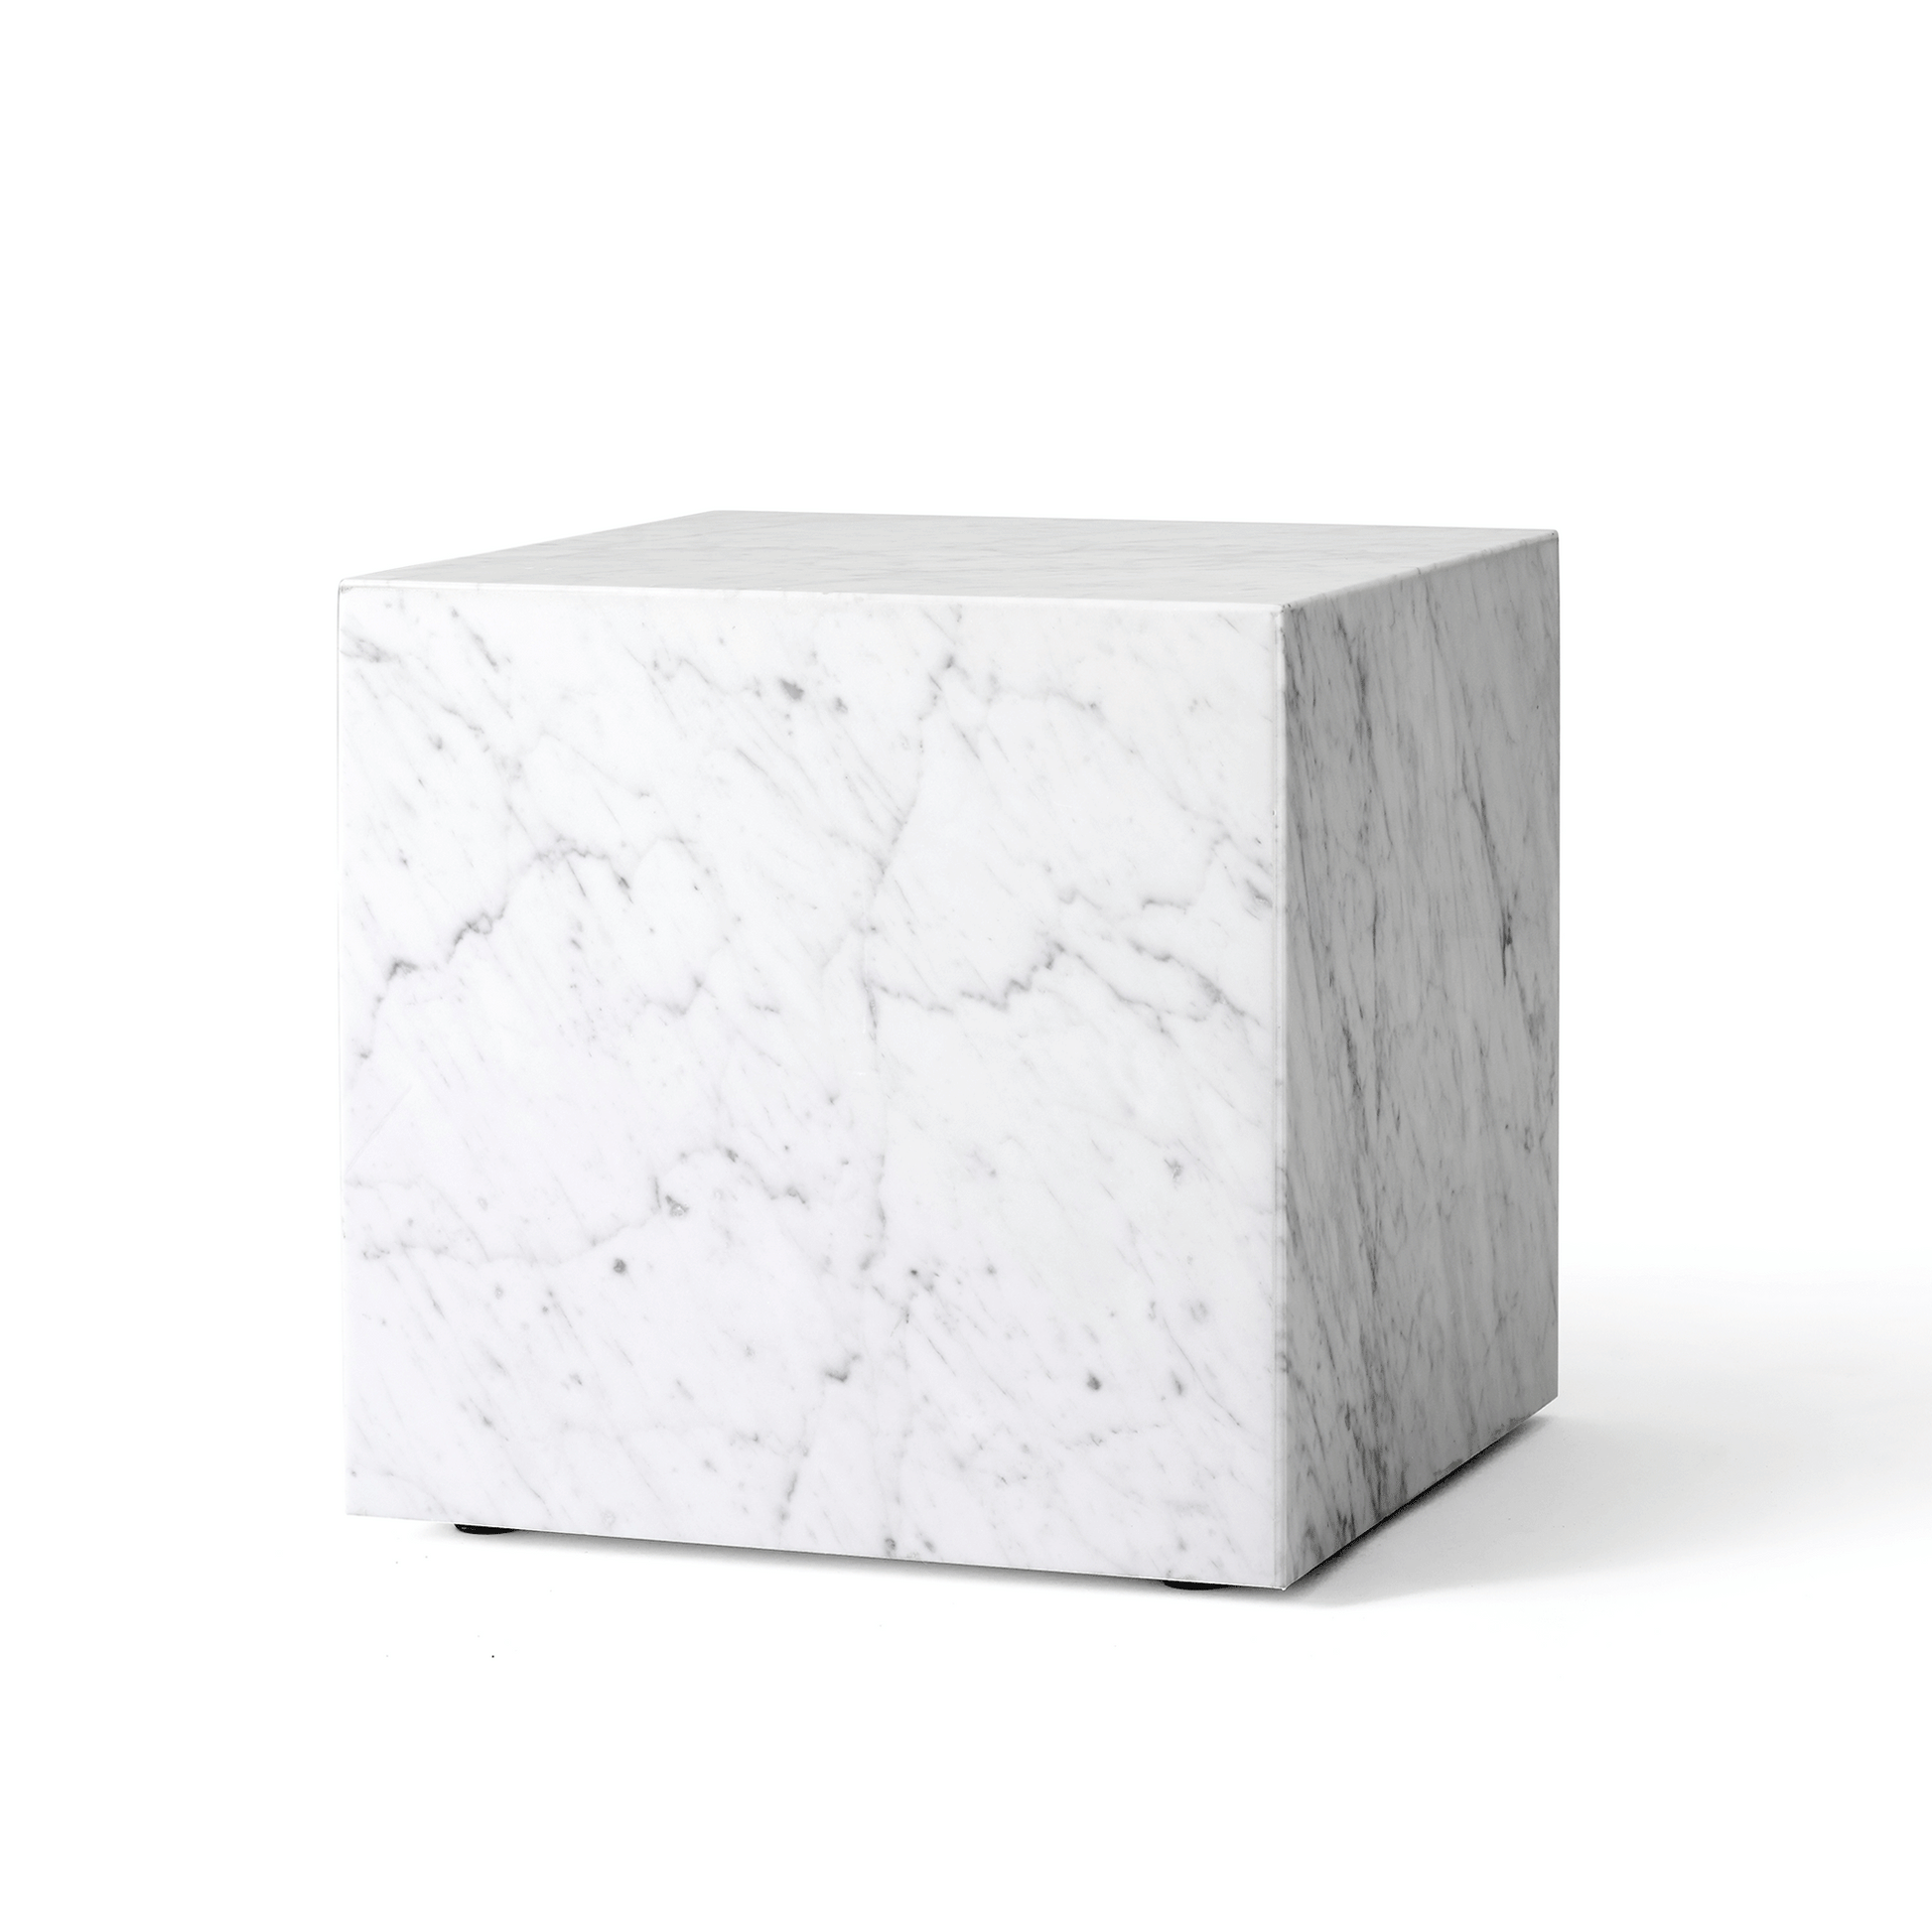 Plinth Coffee Table Cubic by Audo #Carrara Marble